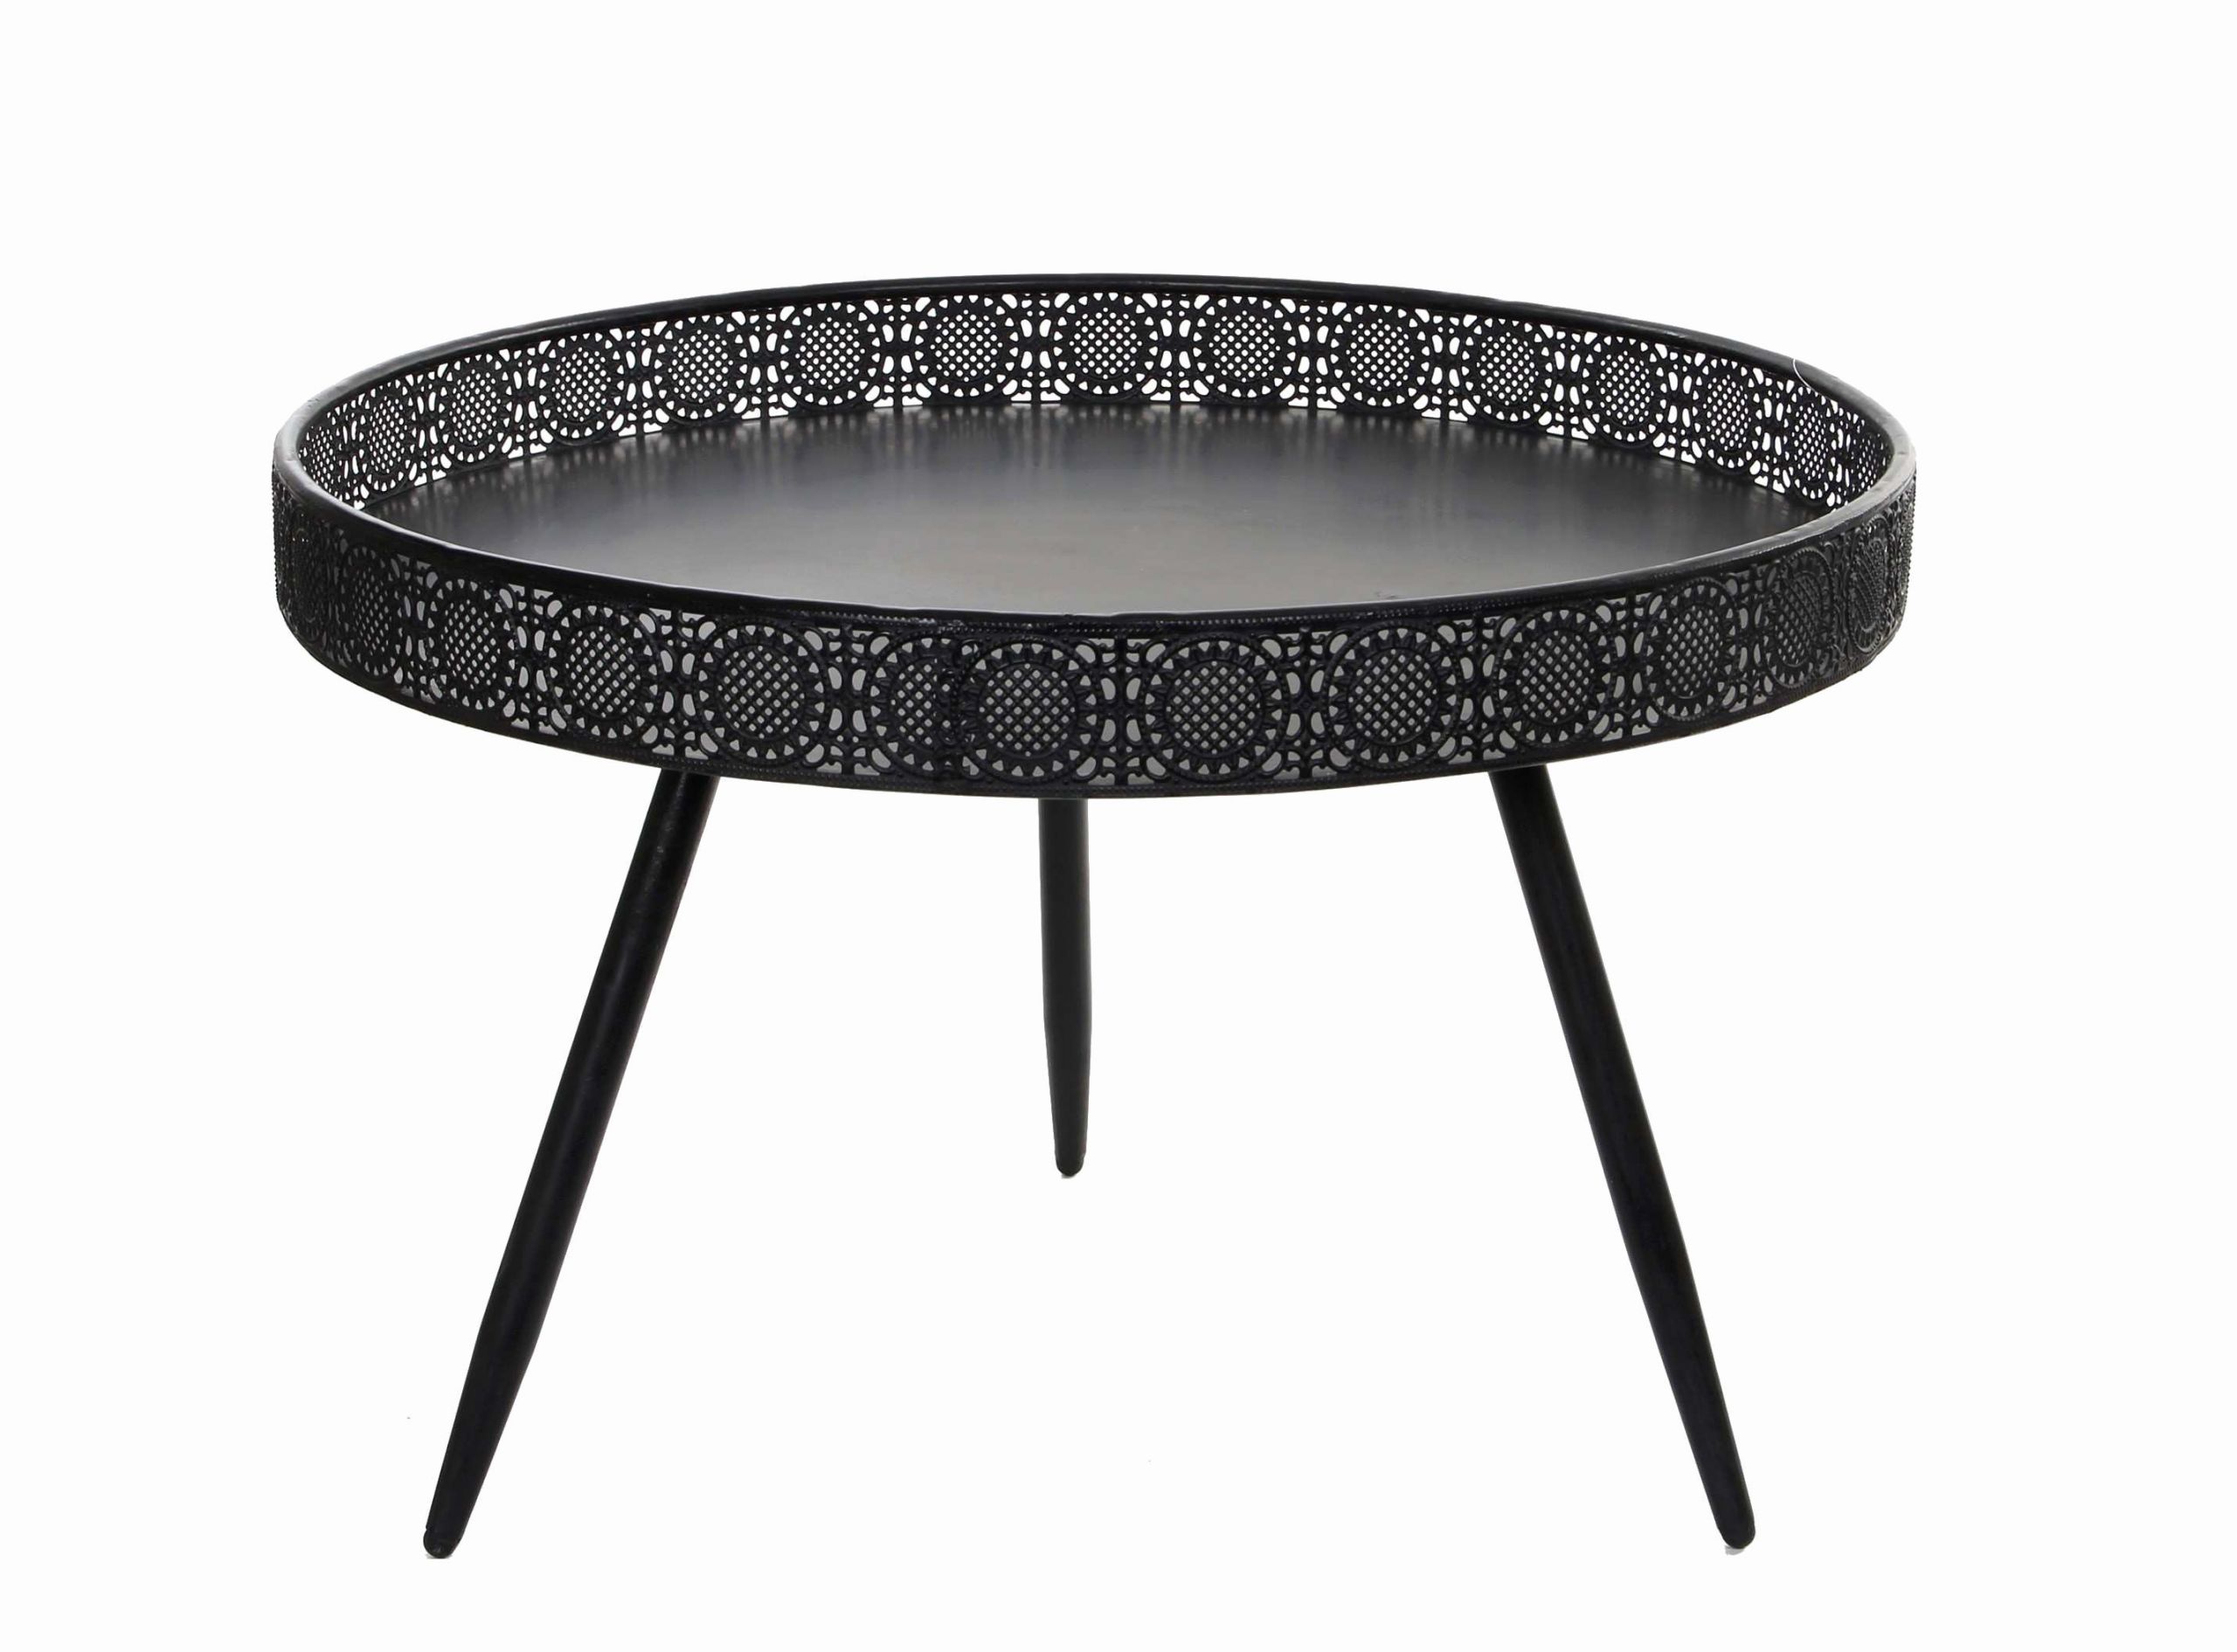 pied table basse industriel luxe meuble table basse pied de table basse meuble ipn 0d archives of pied table basse industriel